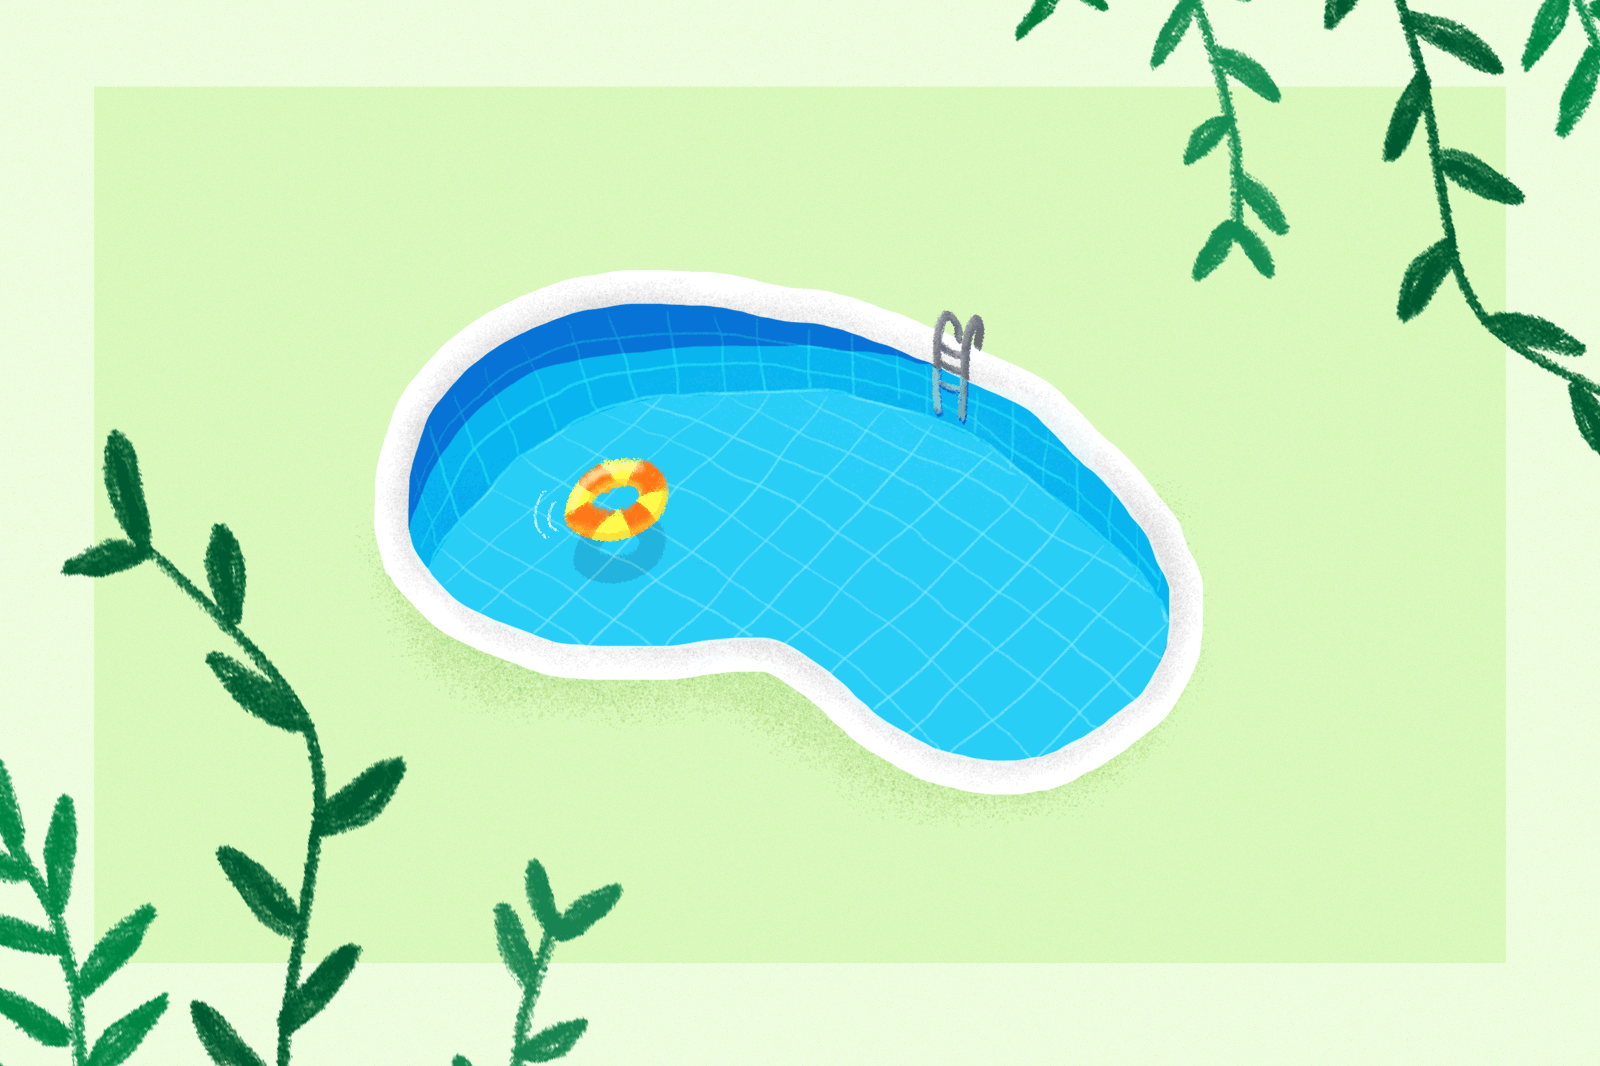 Animation of a floatation ring floating in a kidney-shaped swimming pool.